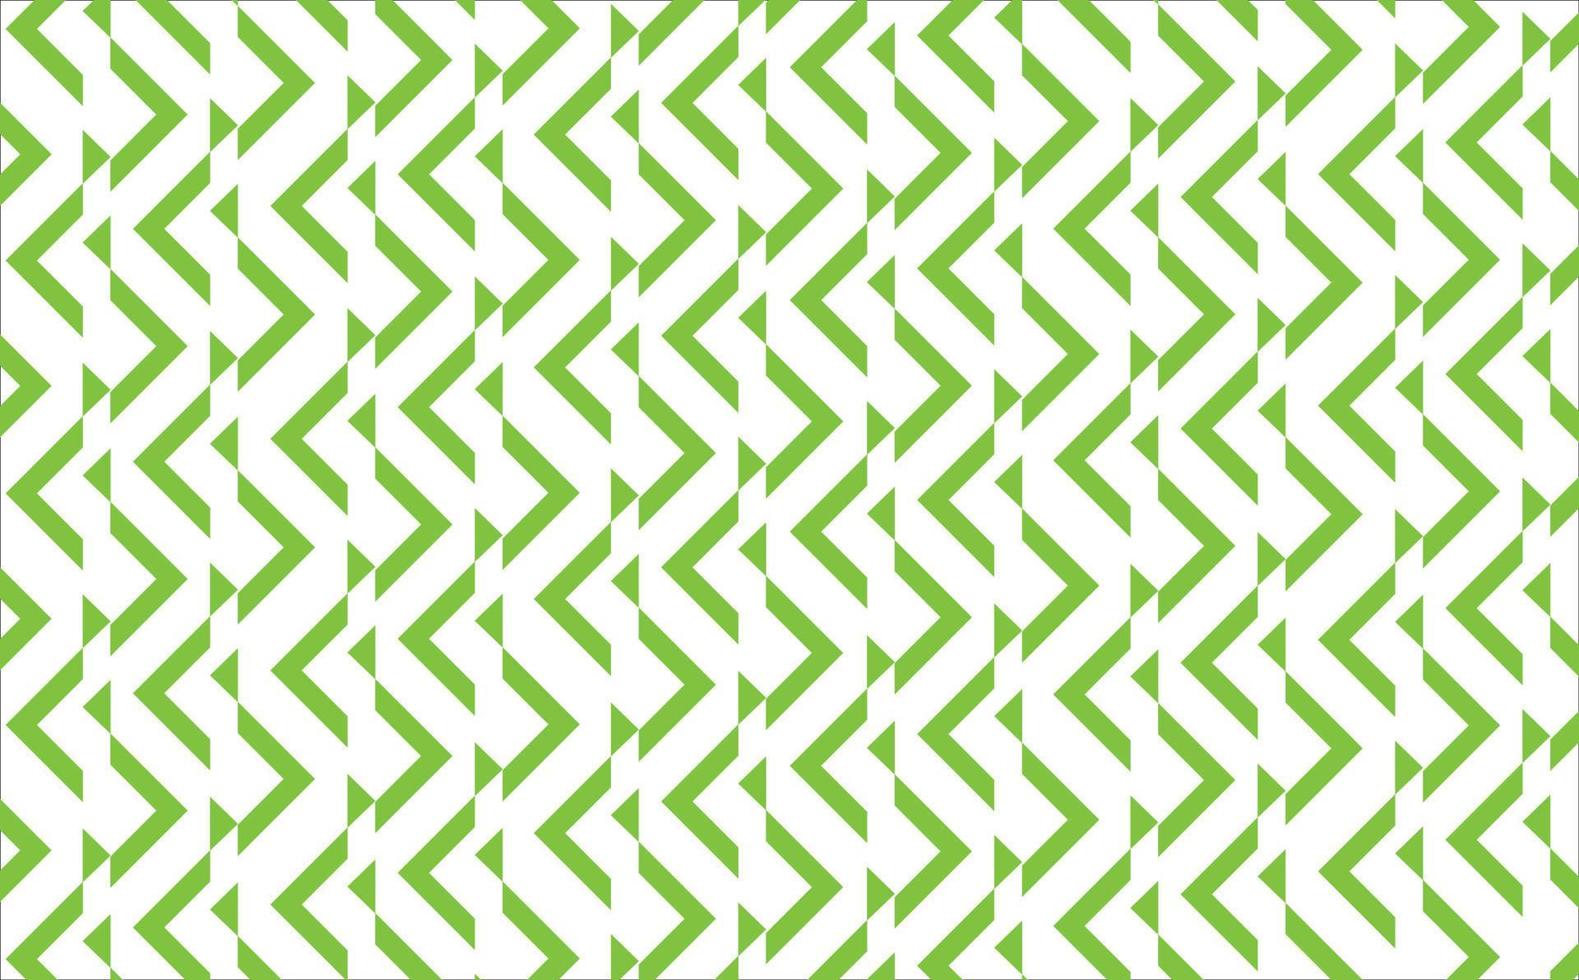 Artistic green colored rhombus cut vector pattern. Zigzag vector pattern. Suitable for wallpaper, banner, cover, fabric, and fill background.